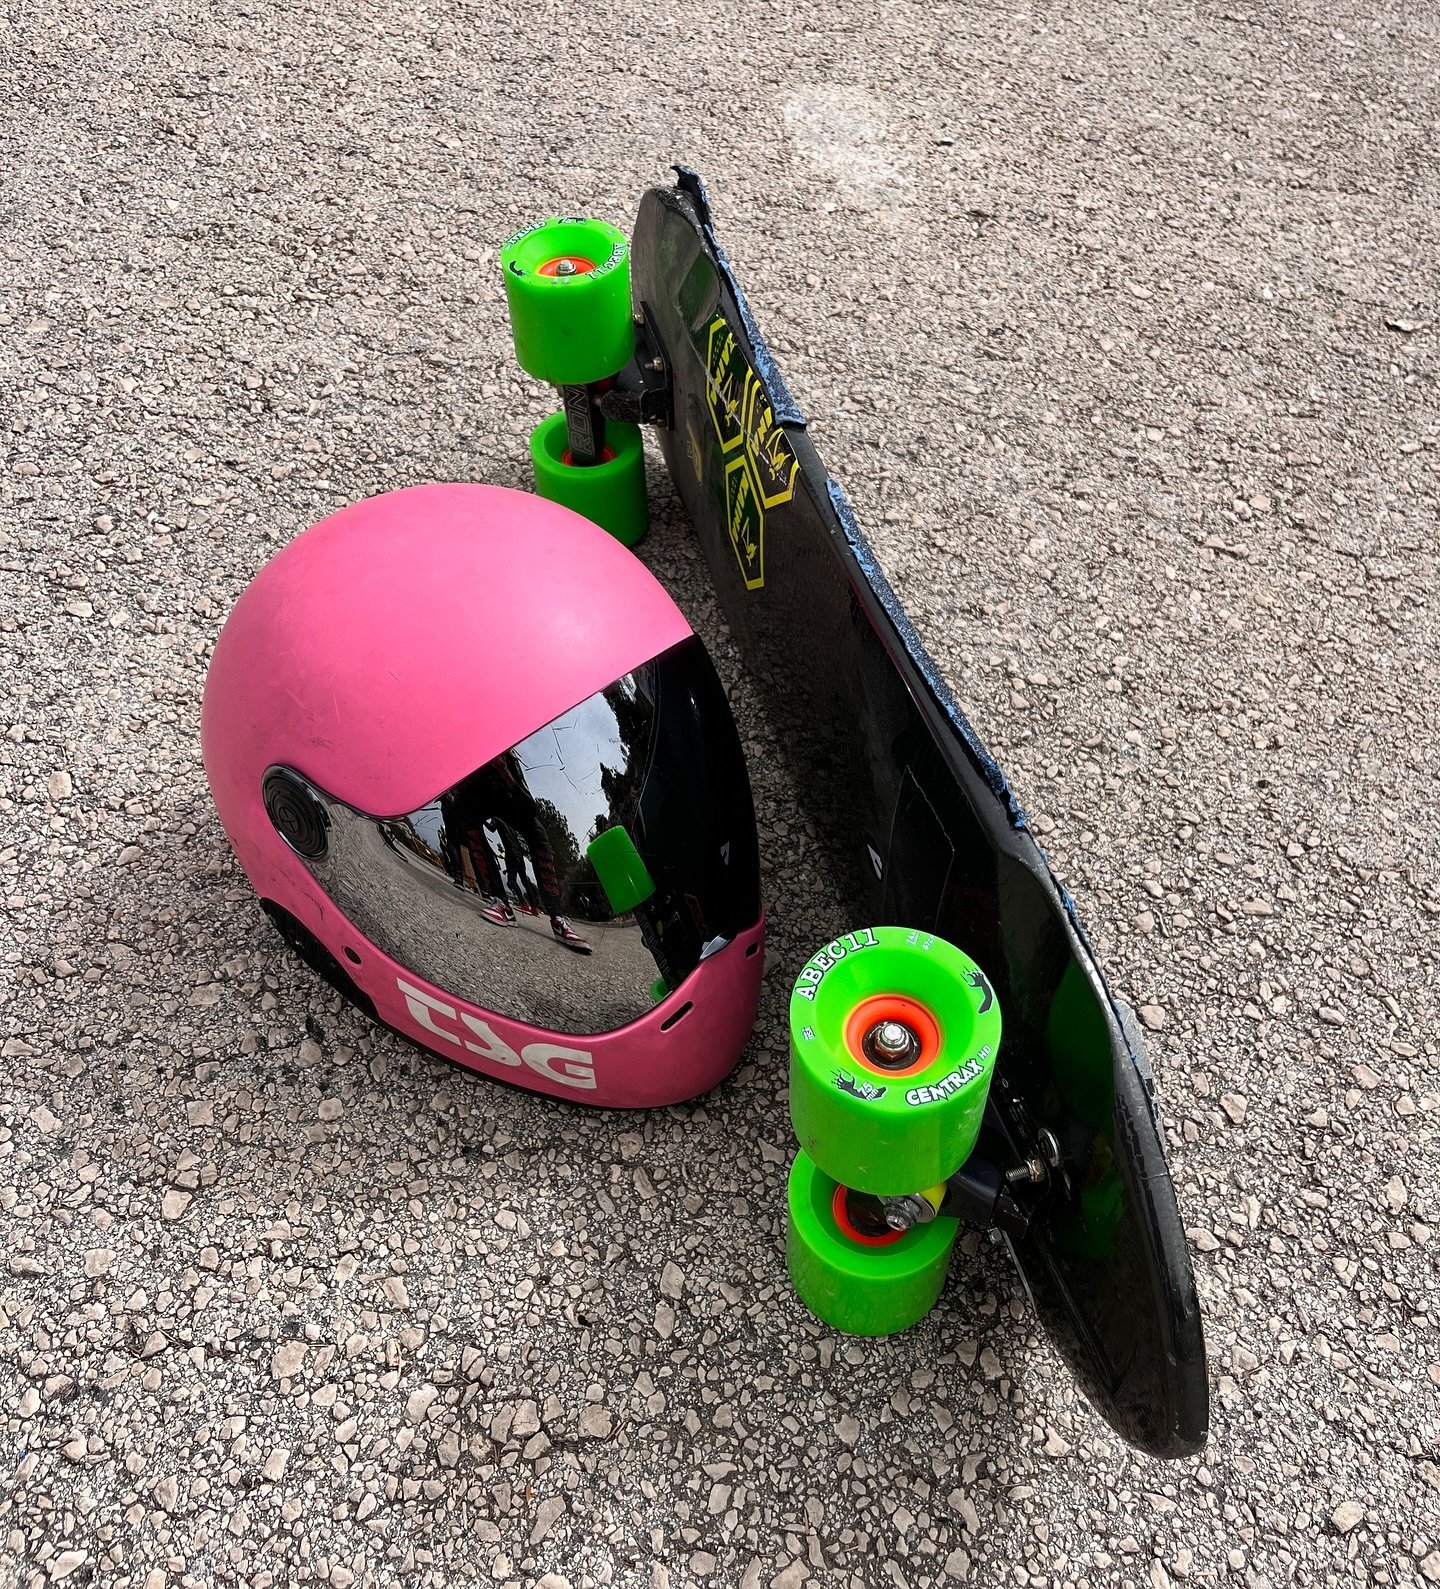 Today&rsquo;s set up brought to you by @nameforainsta666 

Check out his Madrid Ghost wrapped in carbon fibre by @prototypedownhill 

#madridskateboards #madriddownhill